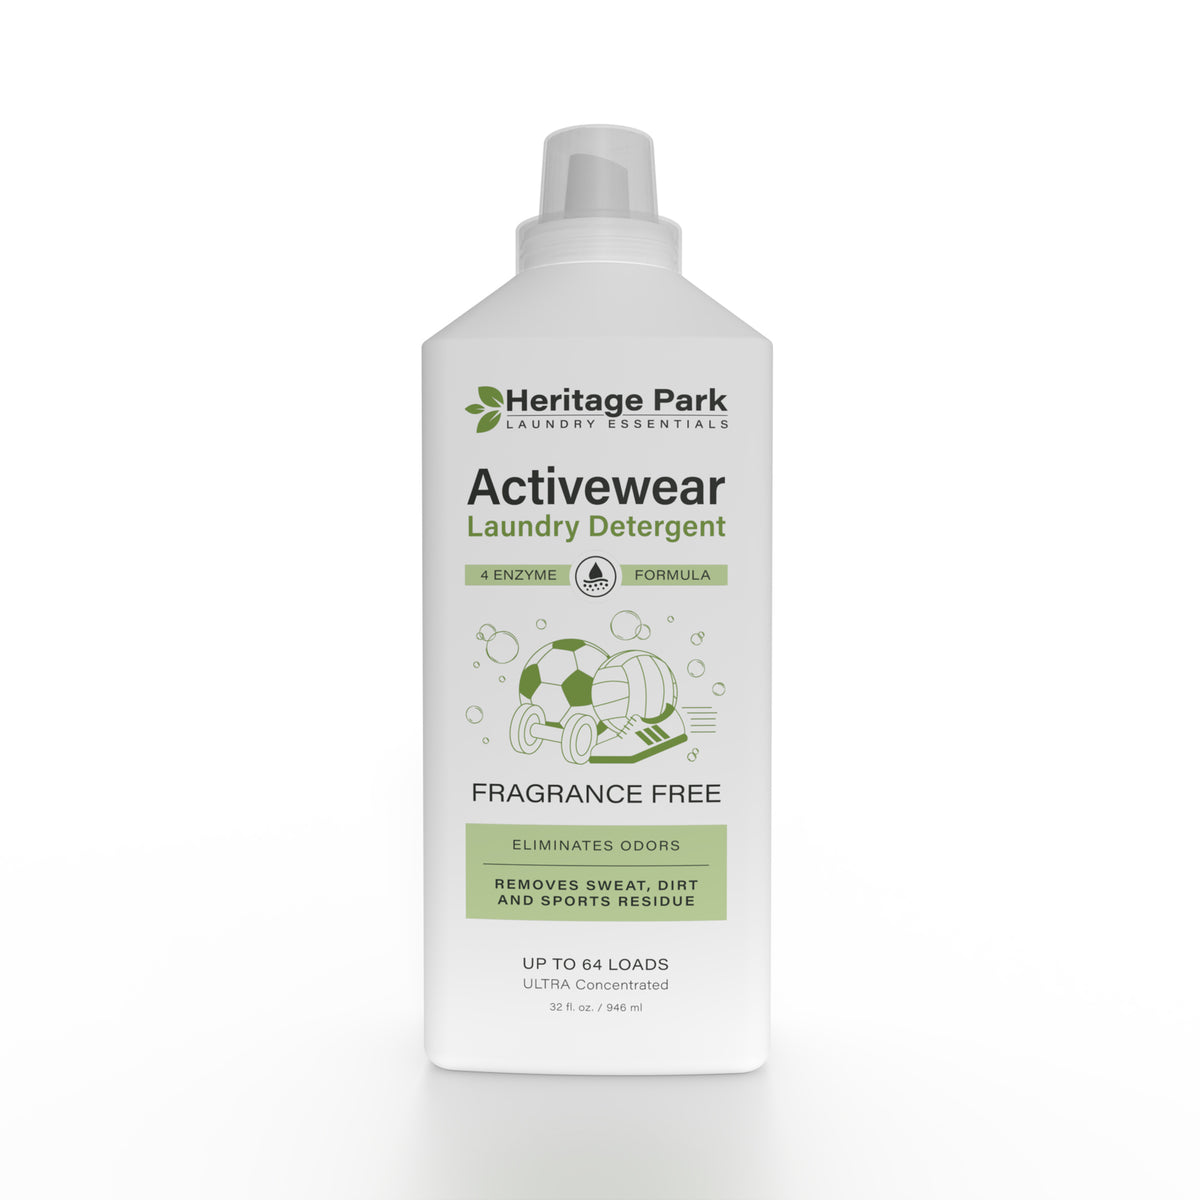 Heritage Park All-Purpose Laundry Detergent - Fragrance Free